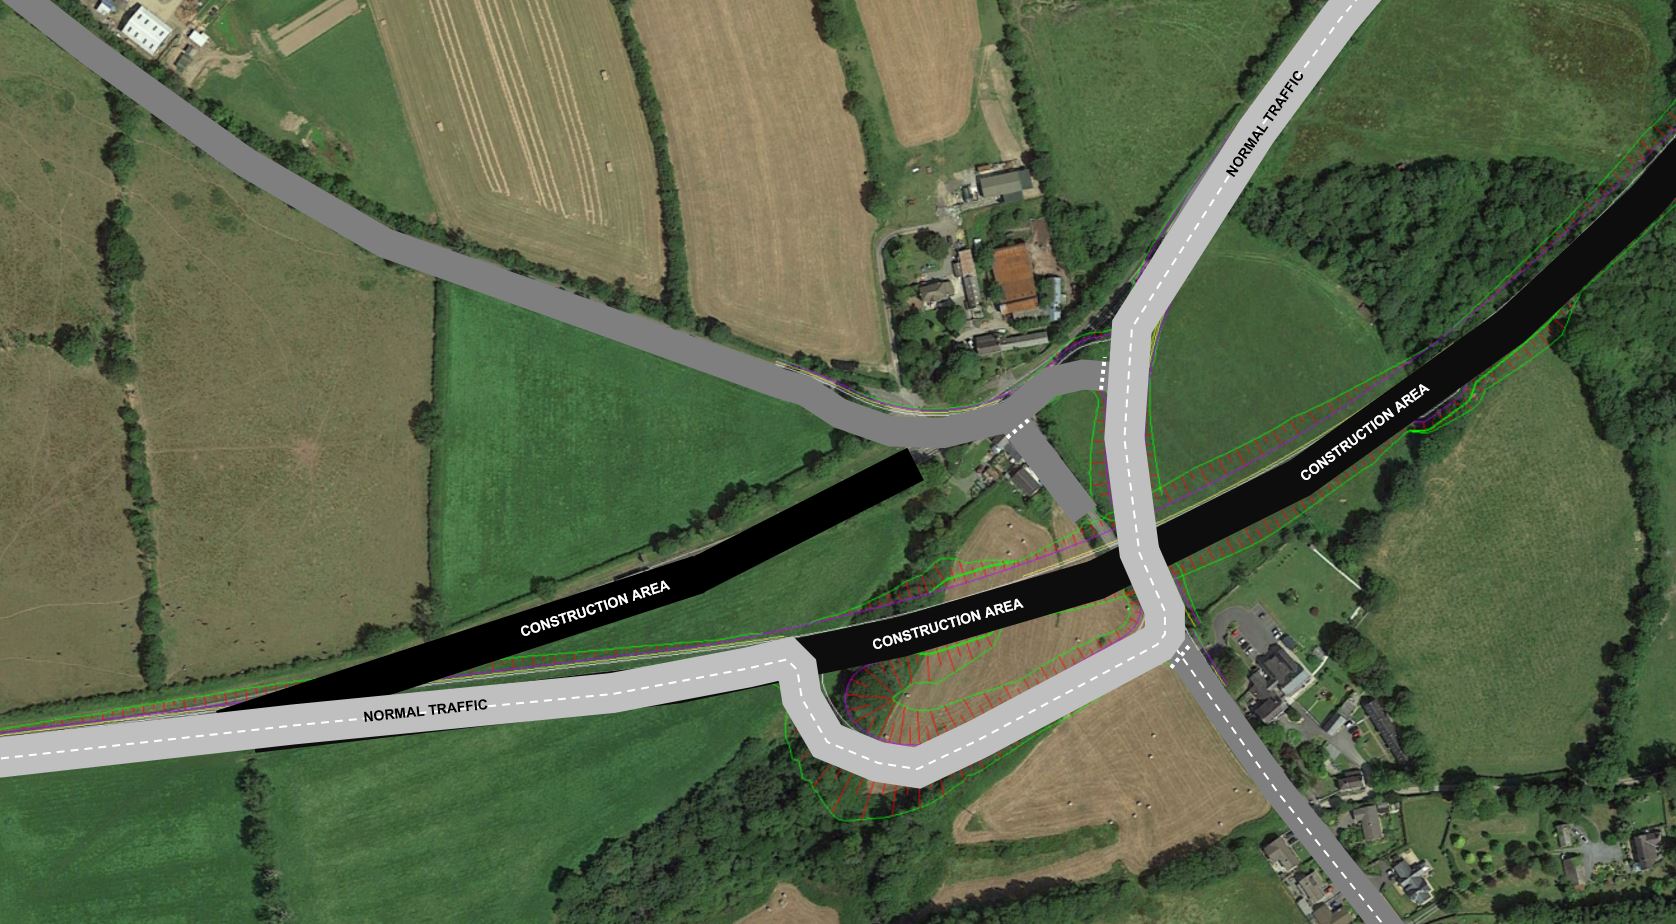 Following the closure, a small section of the new A40 will serve as a temporary measure during ongoing construction.